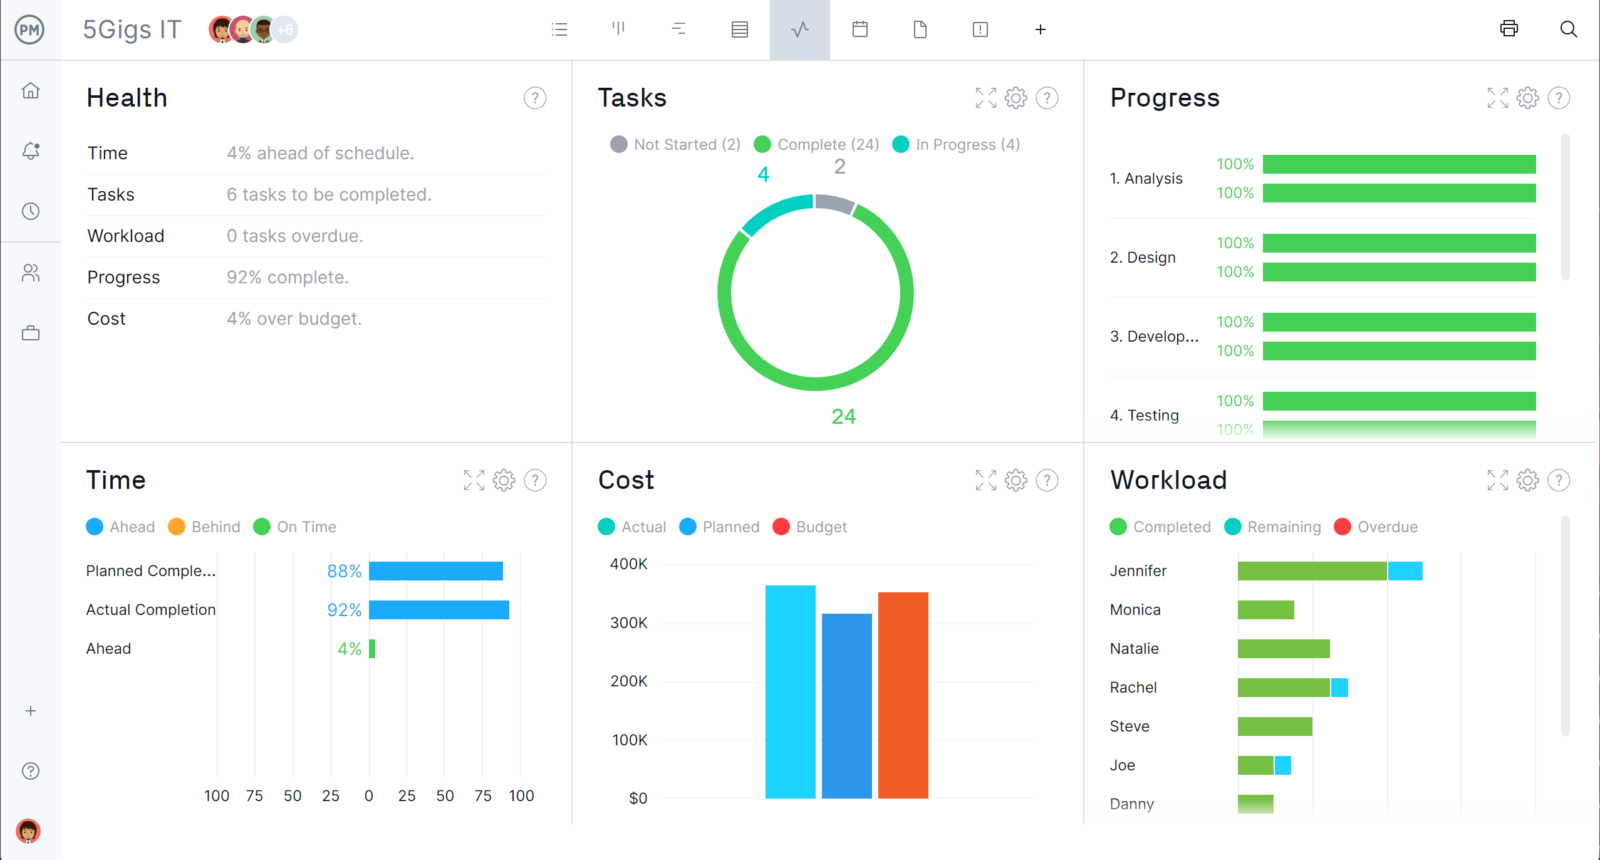 ProjectManager's real-time dashboard helps you track timelines